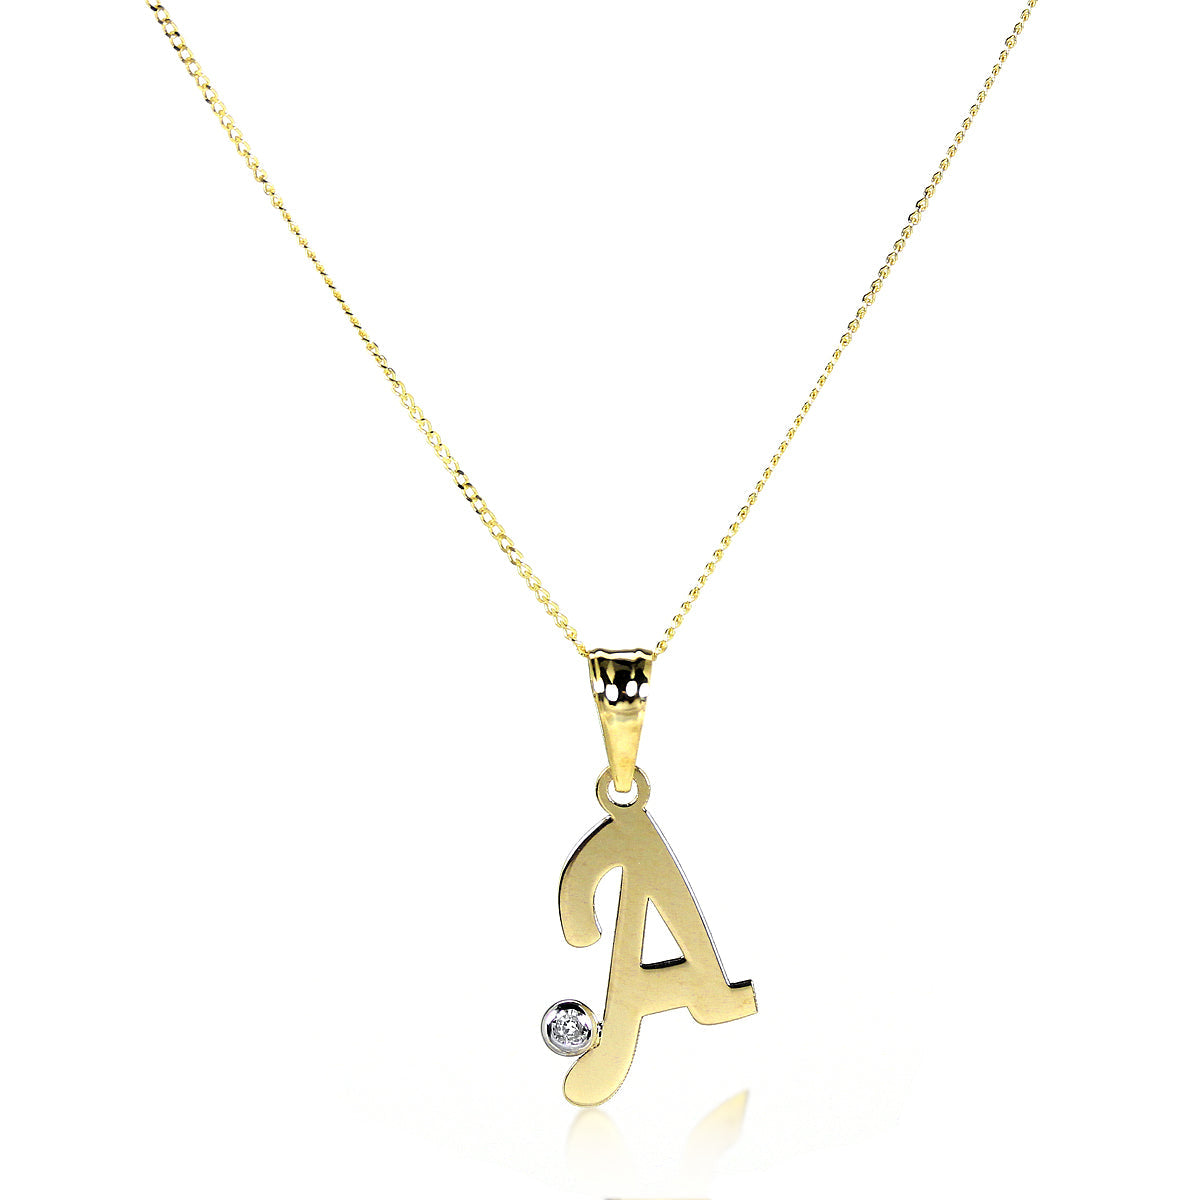 Light 9ct Gold Letter Pendant with CZ Crystal